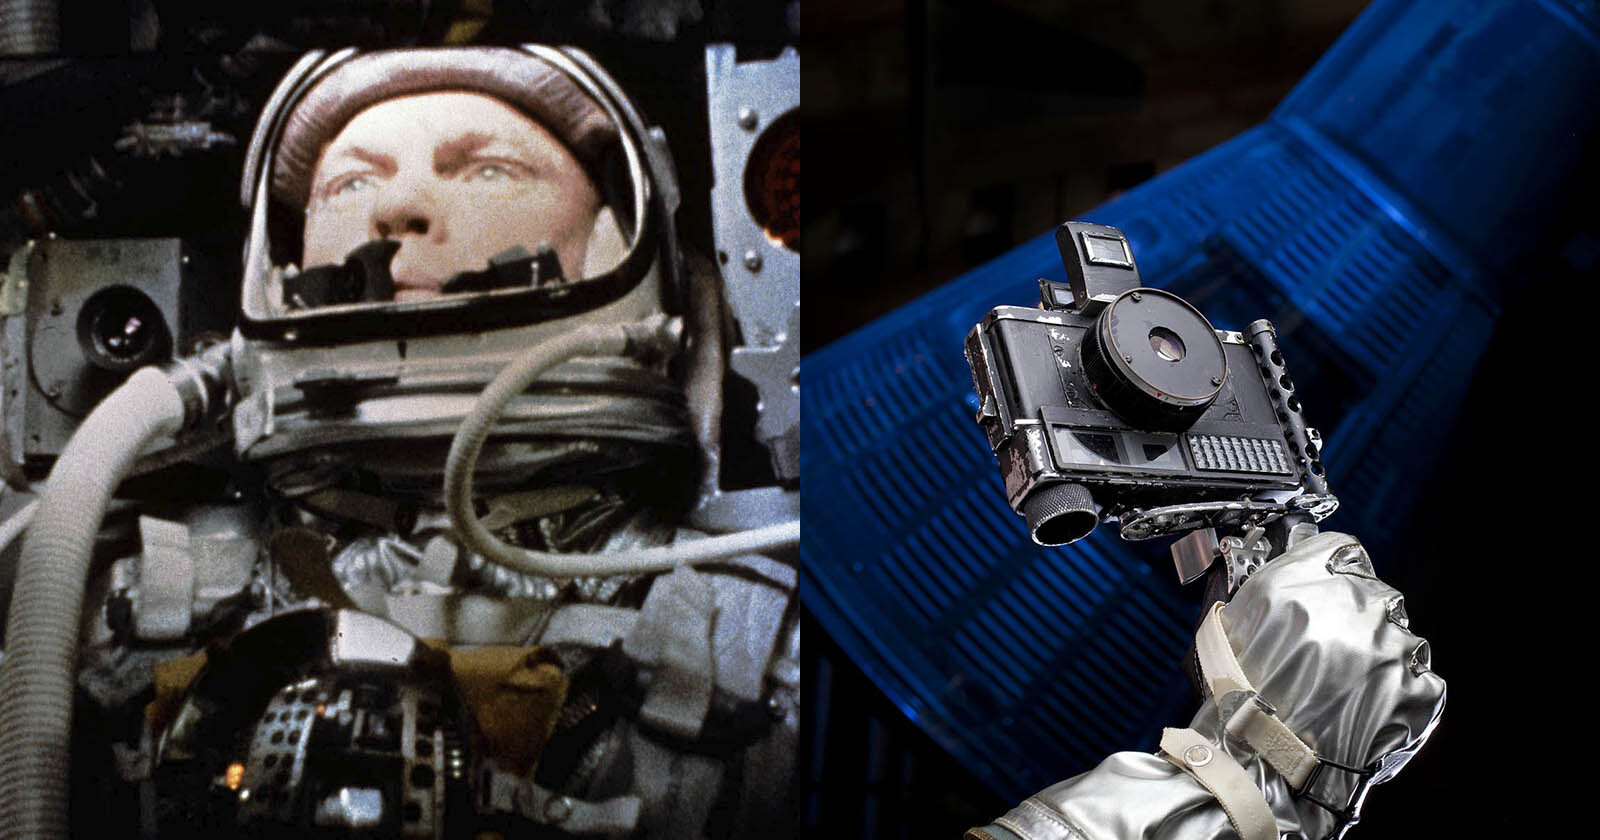 How John Glenns $40 Camera Forced NASA to Rethink Space Missions